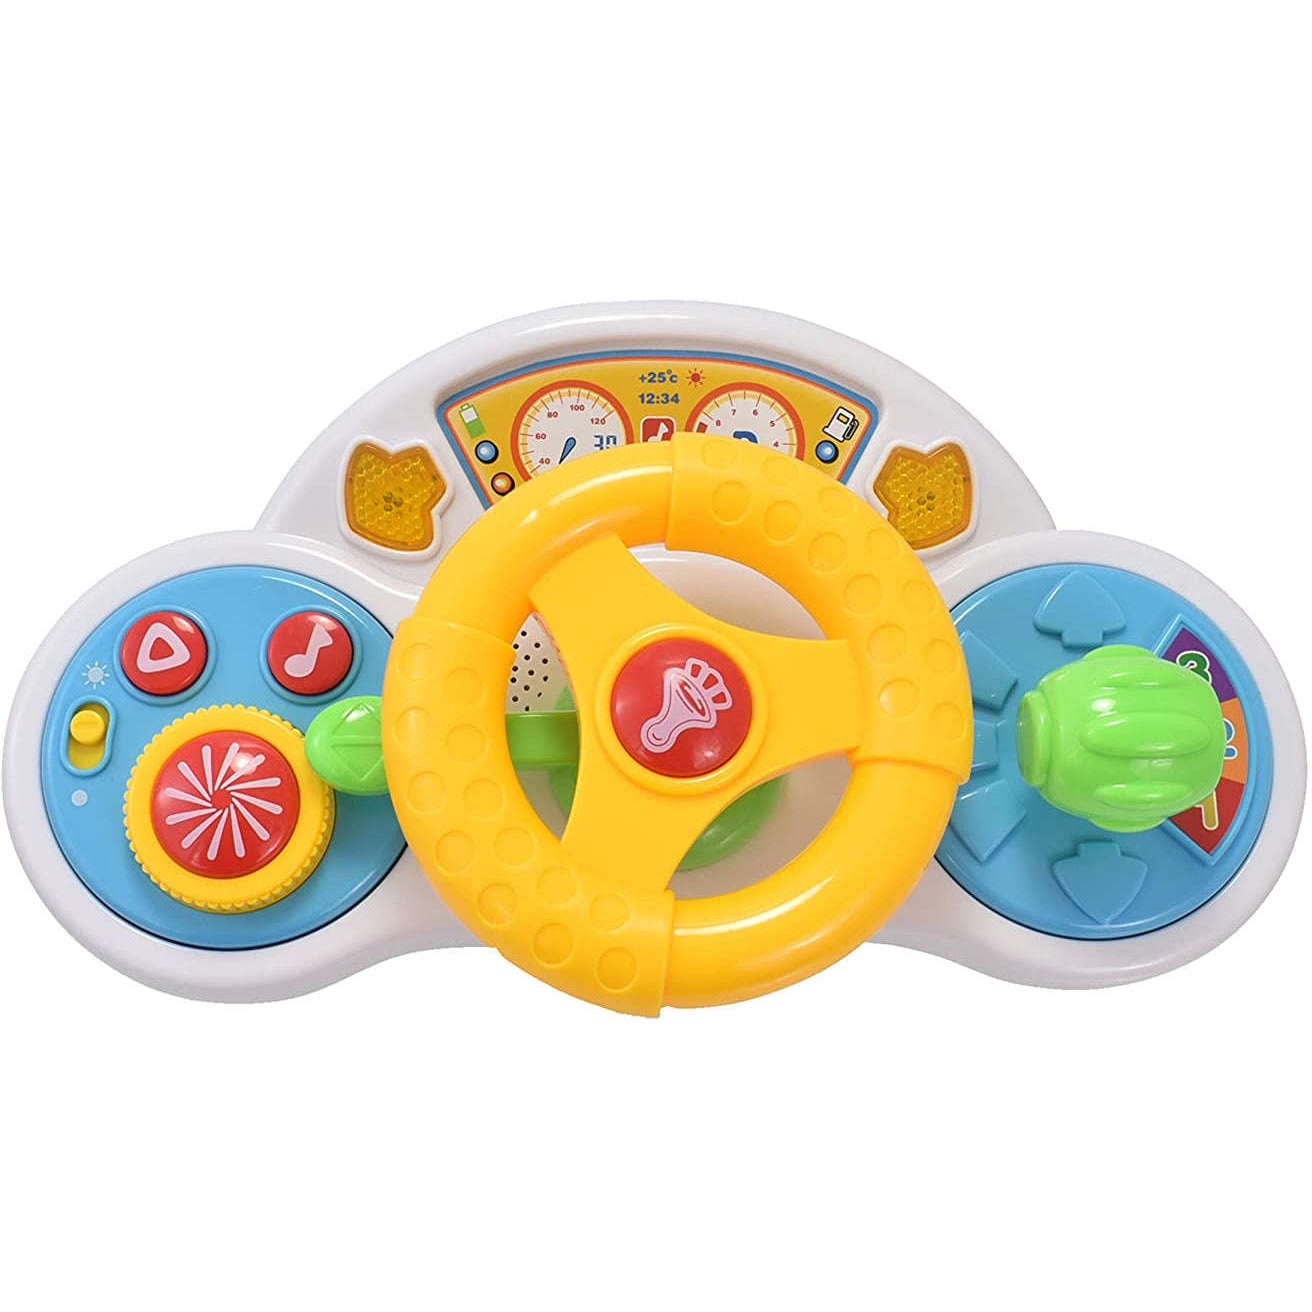 Toys N Tuck:Infunbebe Baby Play 'N' Learn Driver,Infunbebe